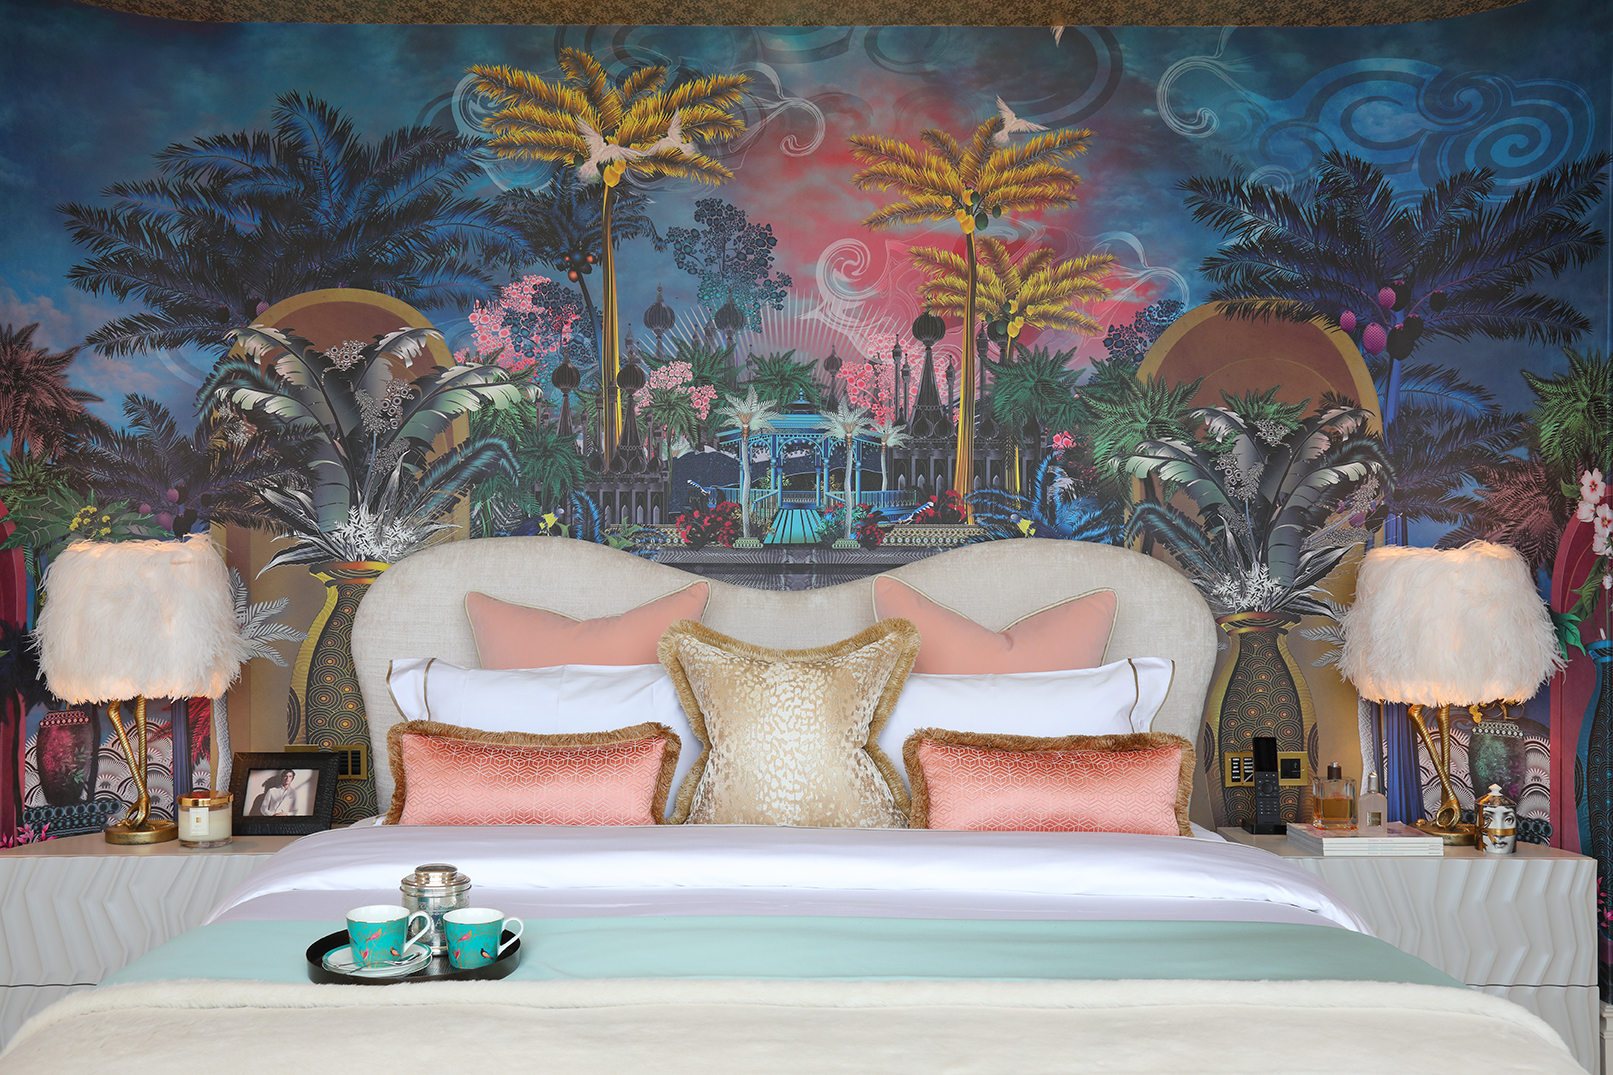 Opulent master bedroom with wallpaper fantasy panorama with palm trees and exotic architecture. A tray with coffee cups sits on the bed, and fluffy bird like lamps are on the bedside tables.